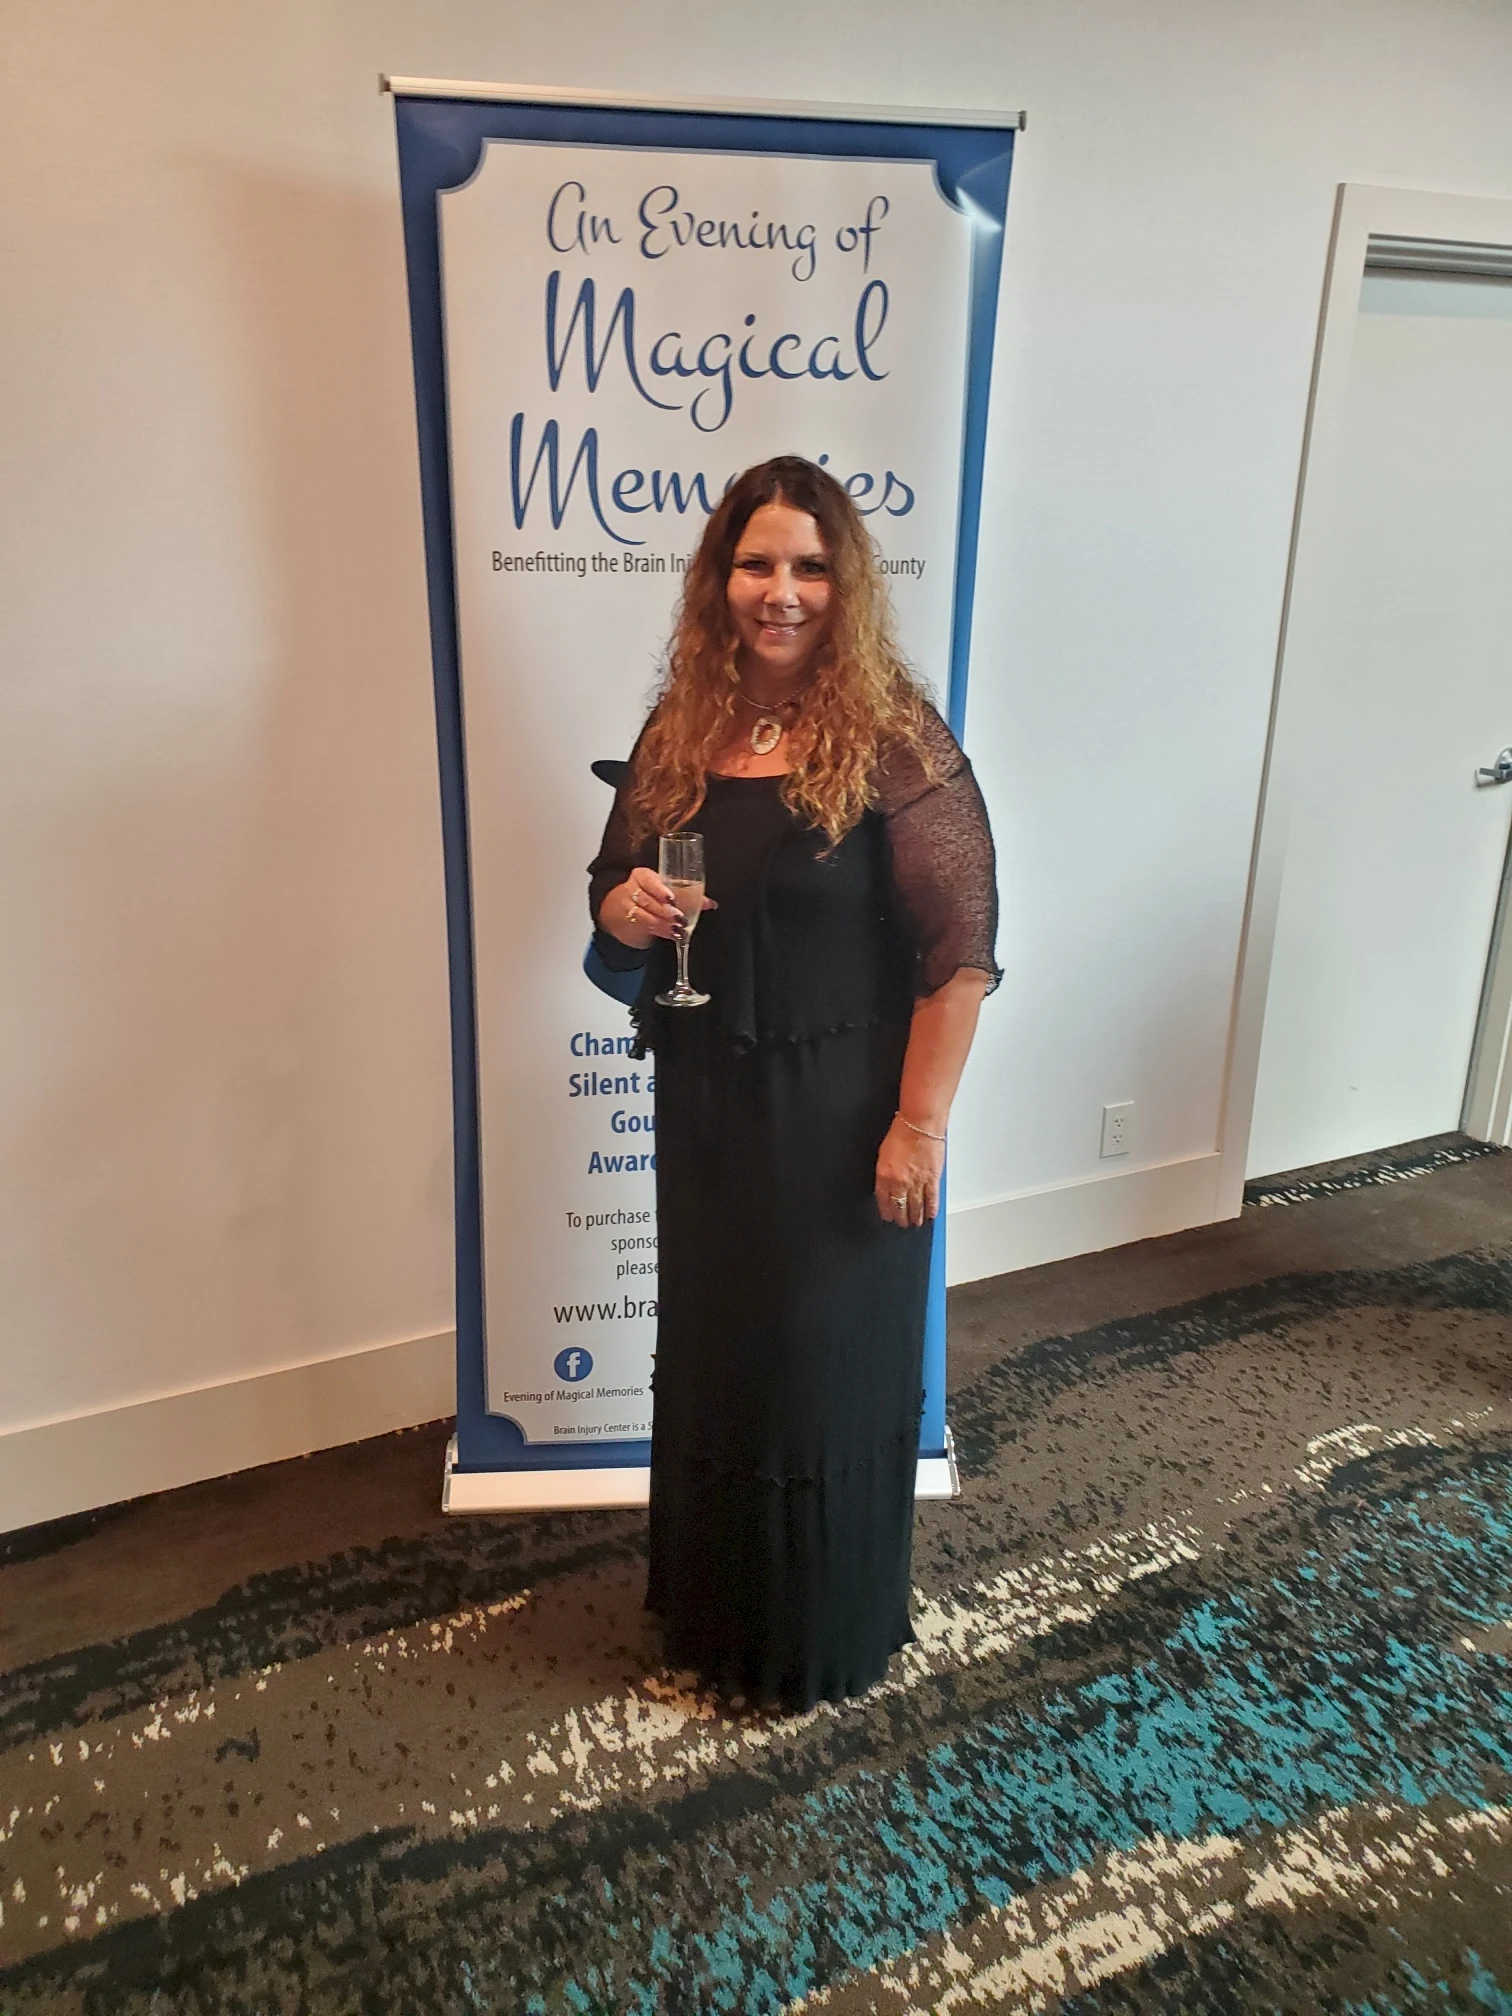 Ann Renee, our Care Director at Senior Helpers, attended the Magical Gala at the Brain Injury Center in Ventura.